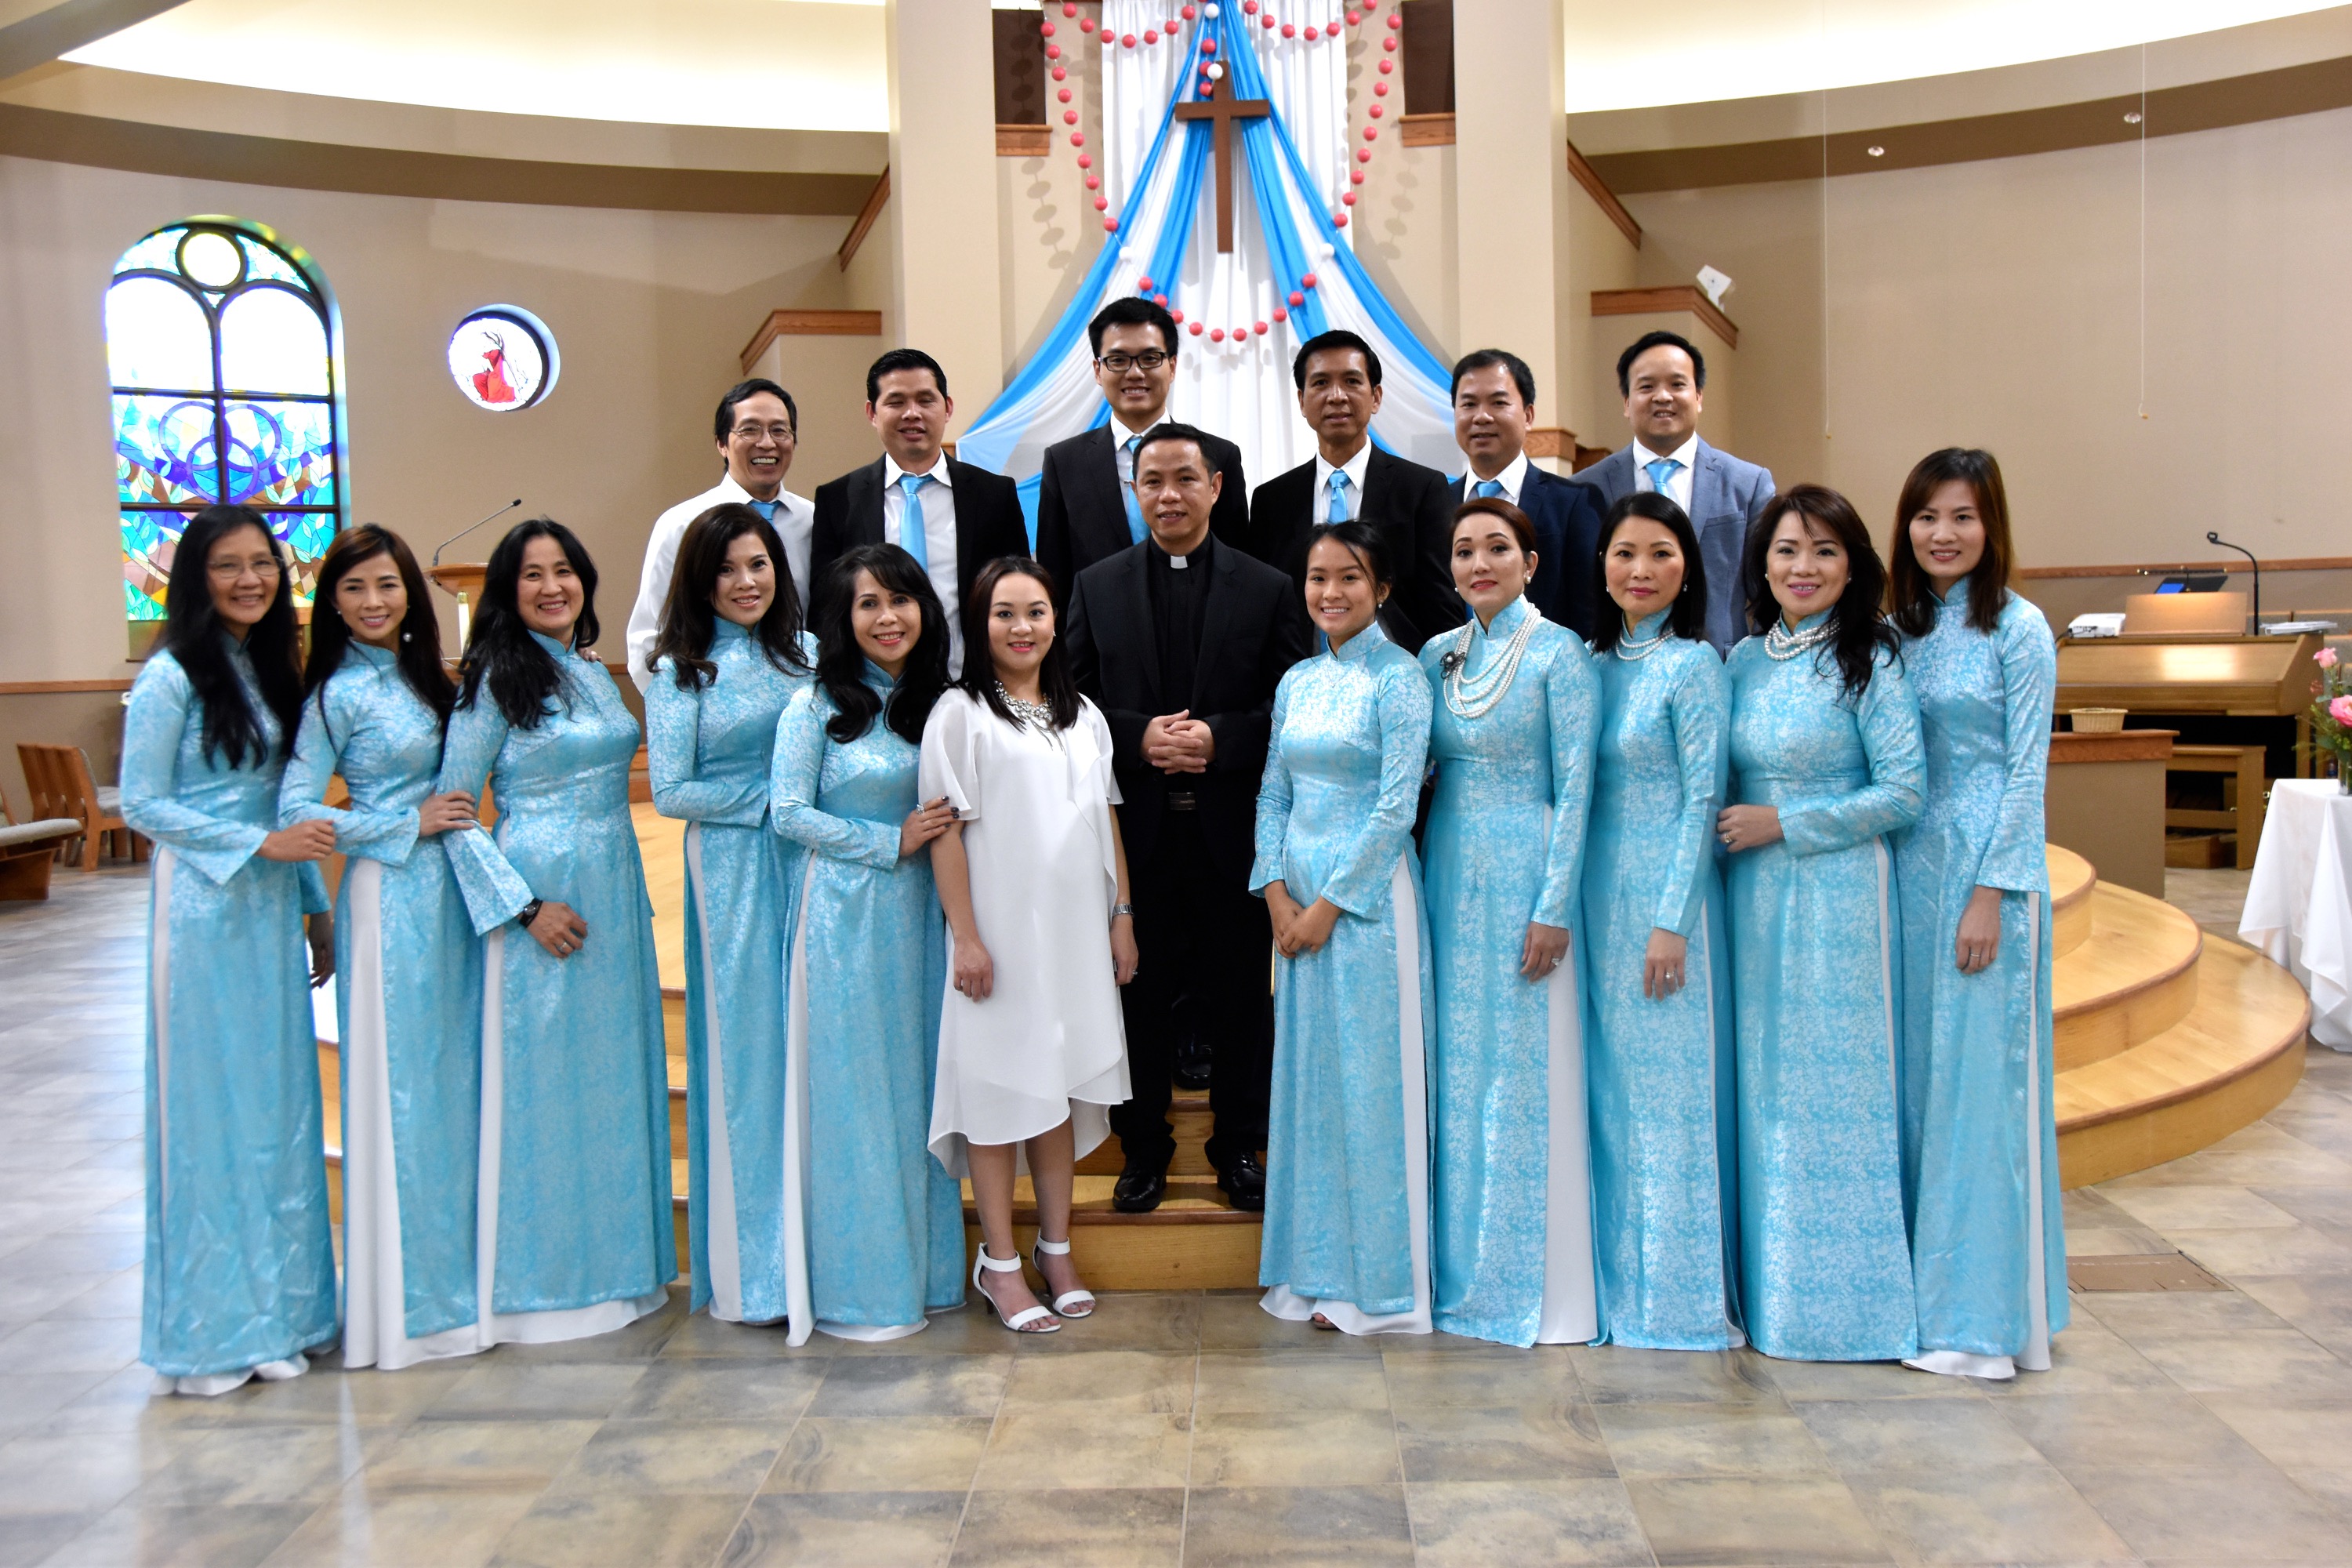 In 2018, Vietnamese Catholics celebrated their 40th anniversary as part of the Milwaukee community with a special mass at St. Martin of Tours in Franklin. 